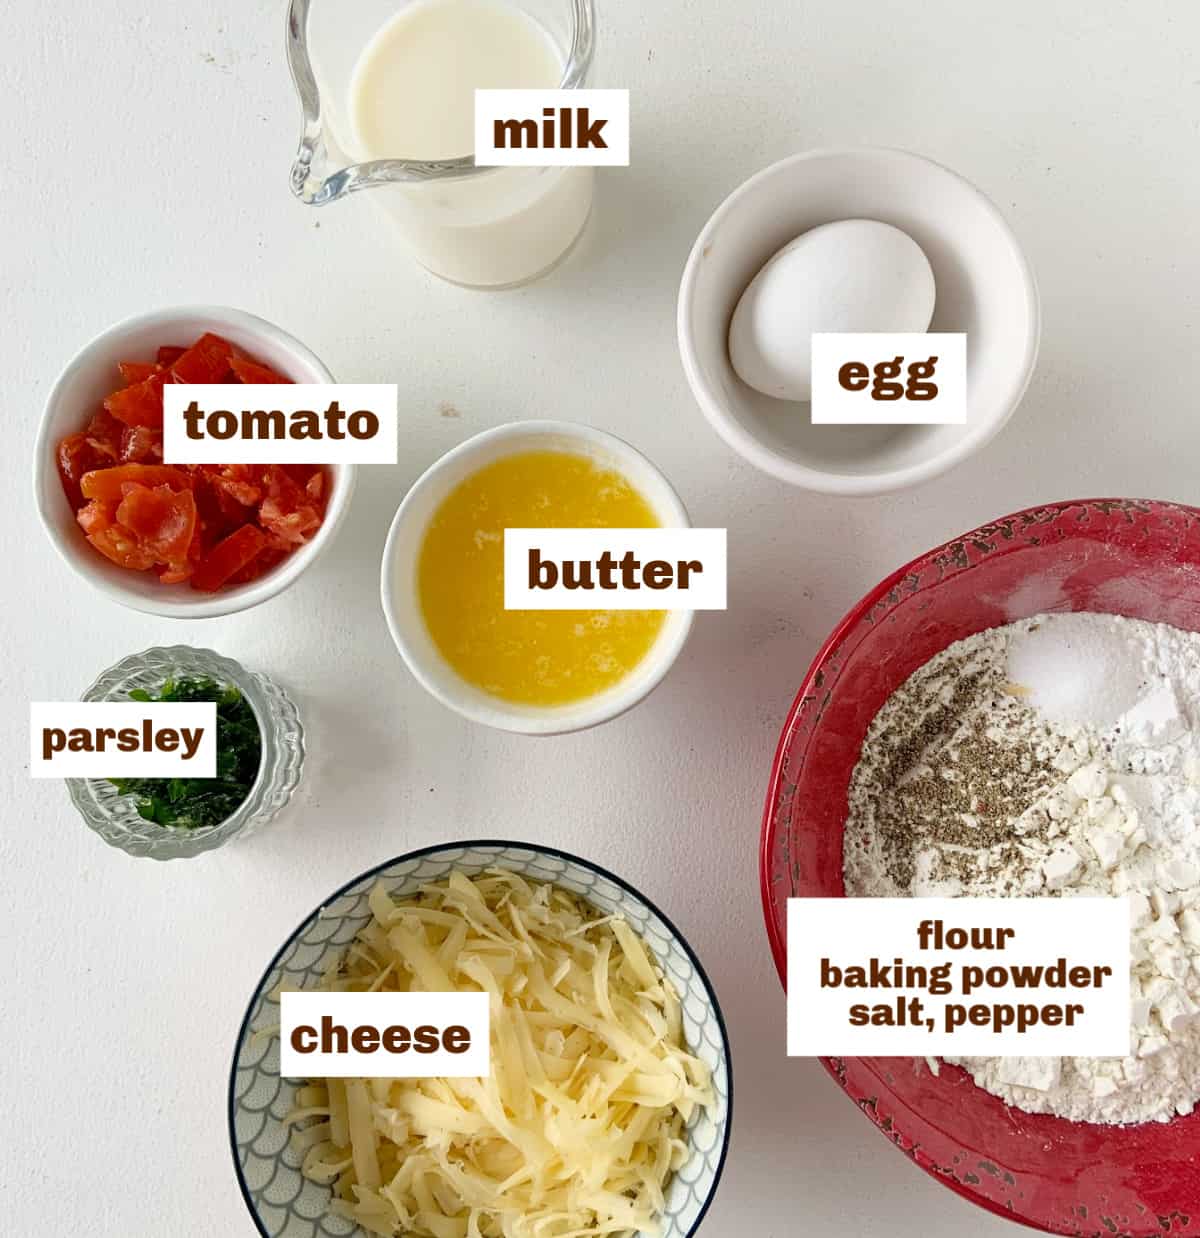 Bowls with cheese, tomato, and other basic ingredients on a white surface